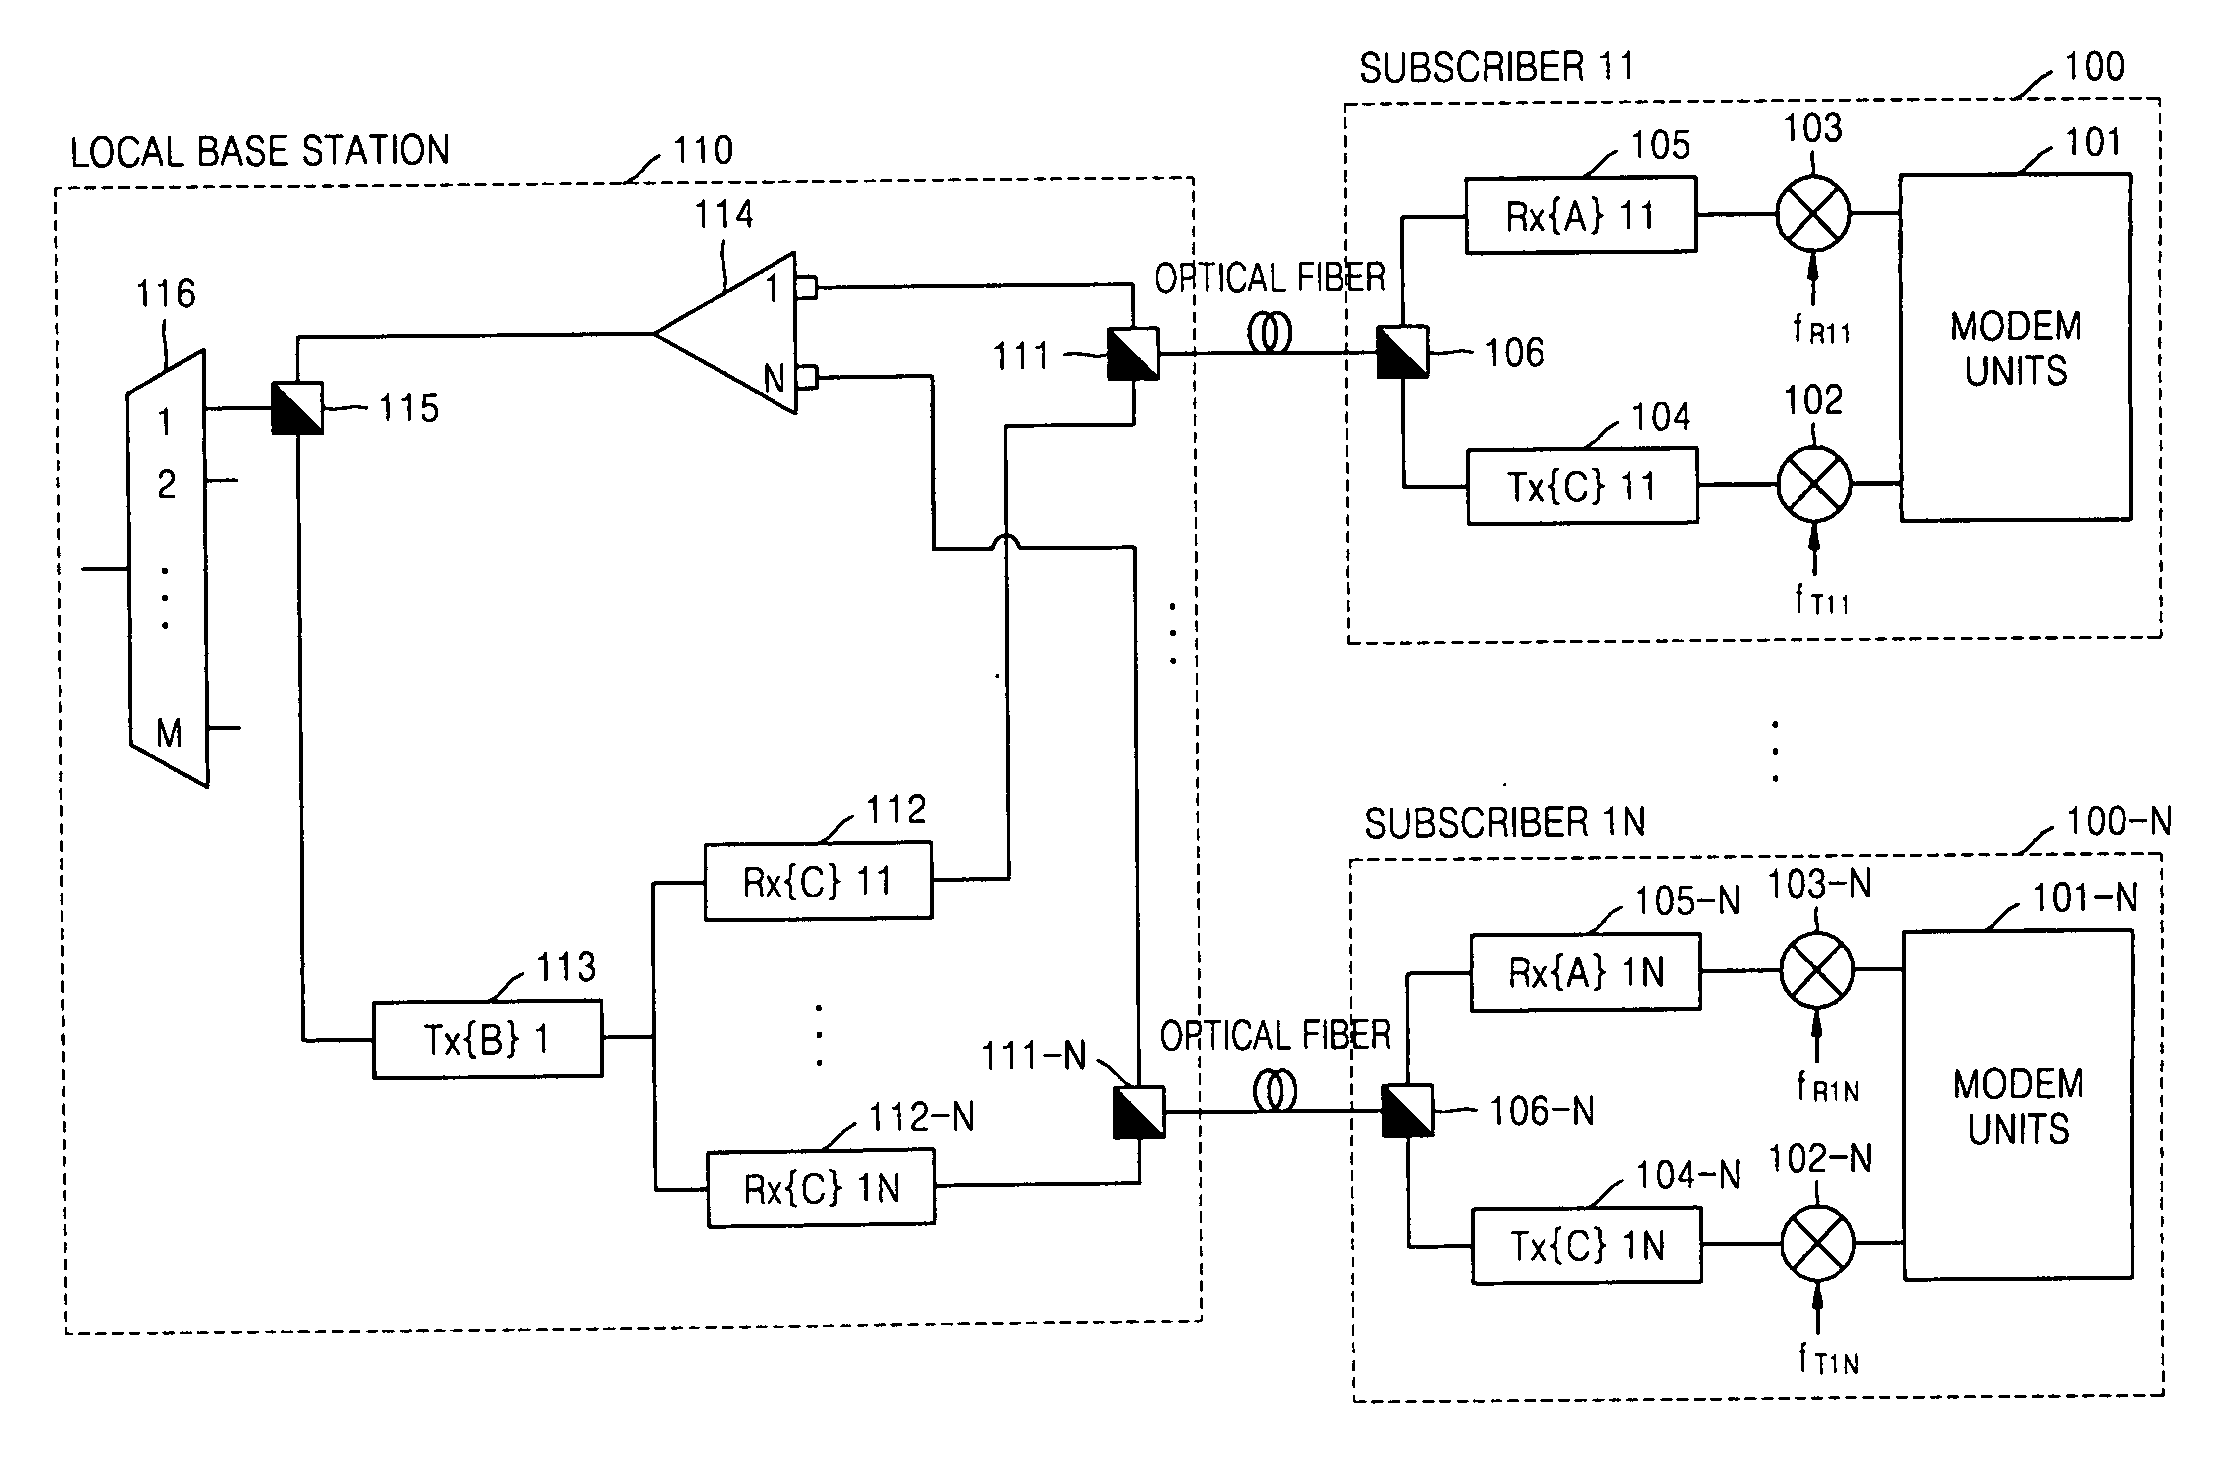 Optical transmission apparatus and optical access network for wavelength-division multiplexing optical network with both sub-carrier multiplex and sub-carrier multiple access schemes